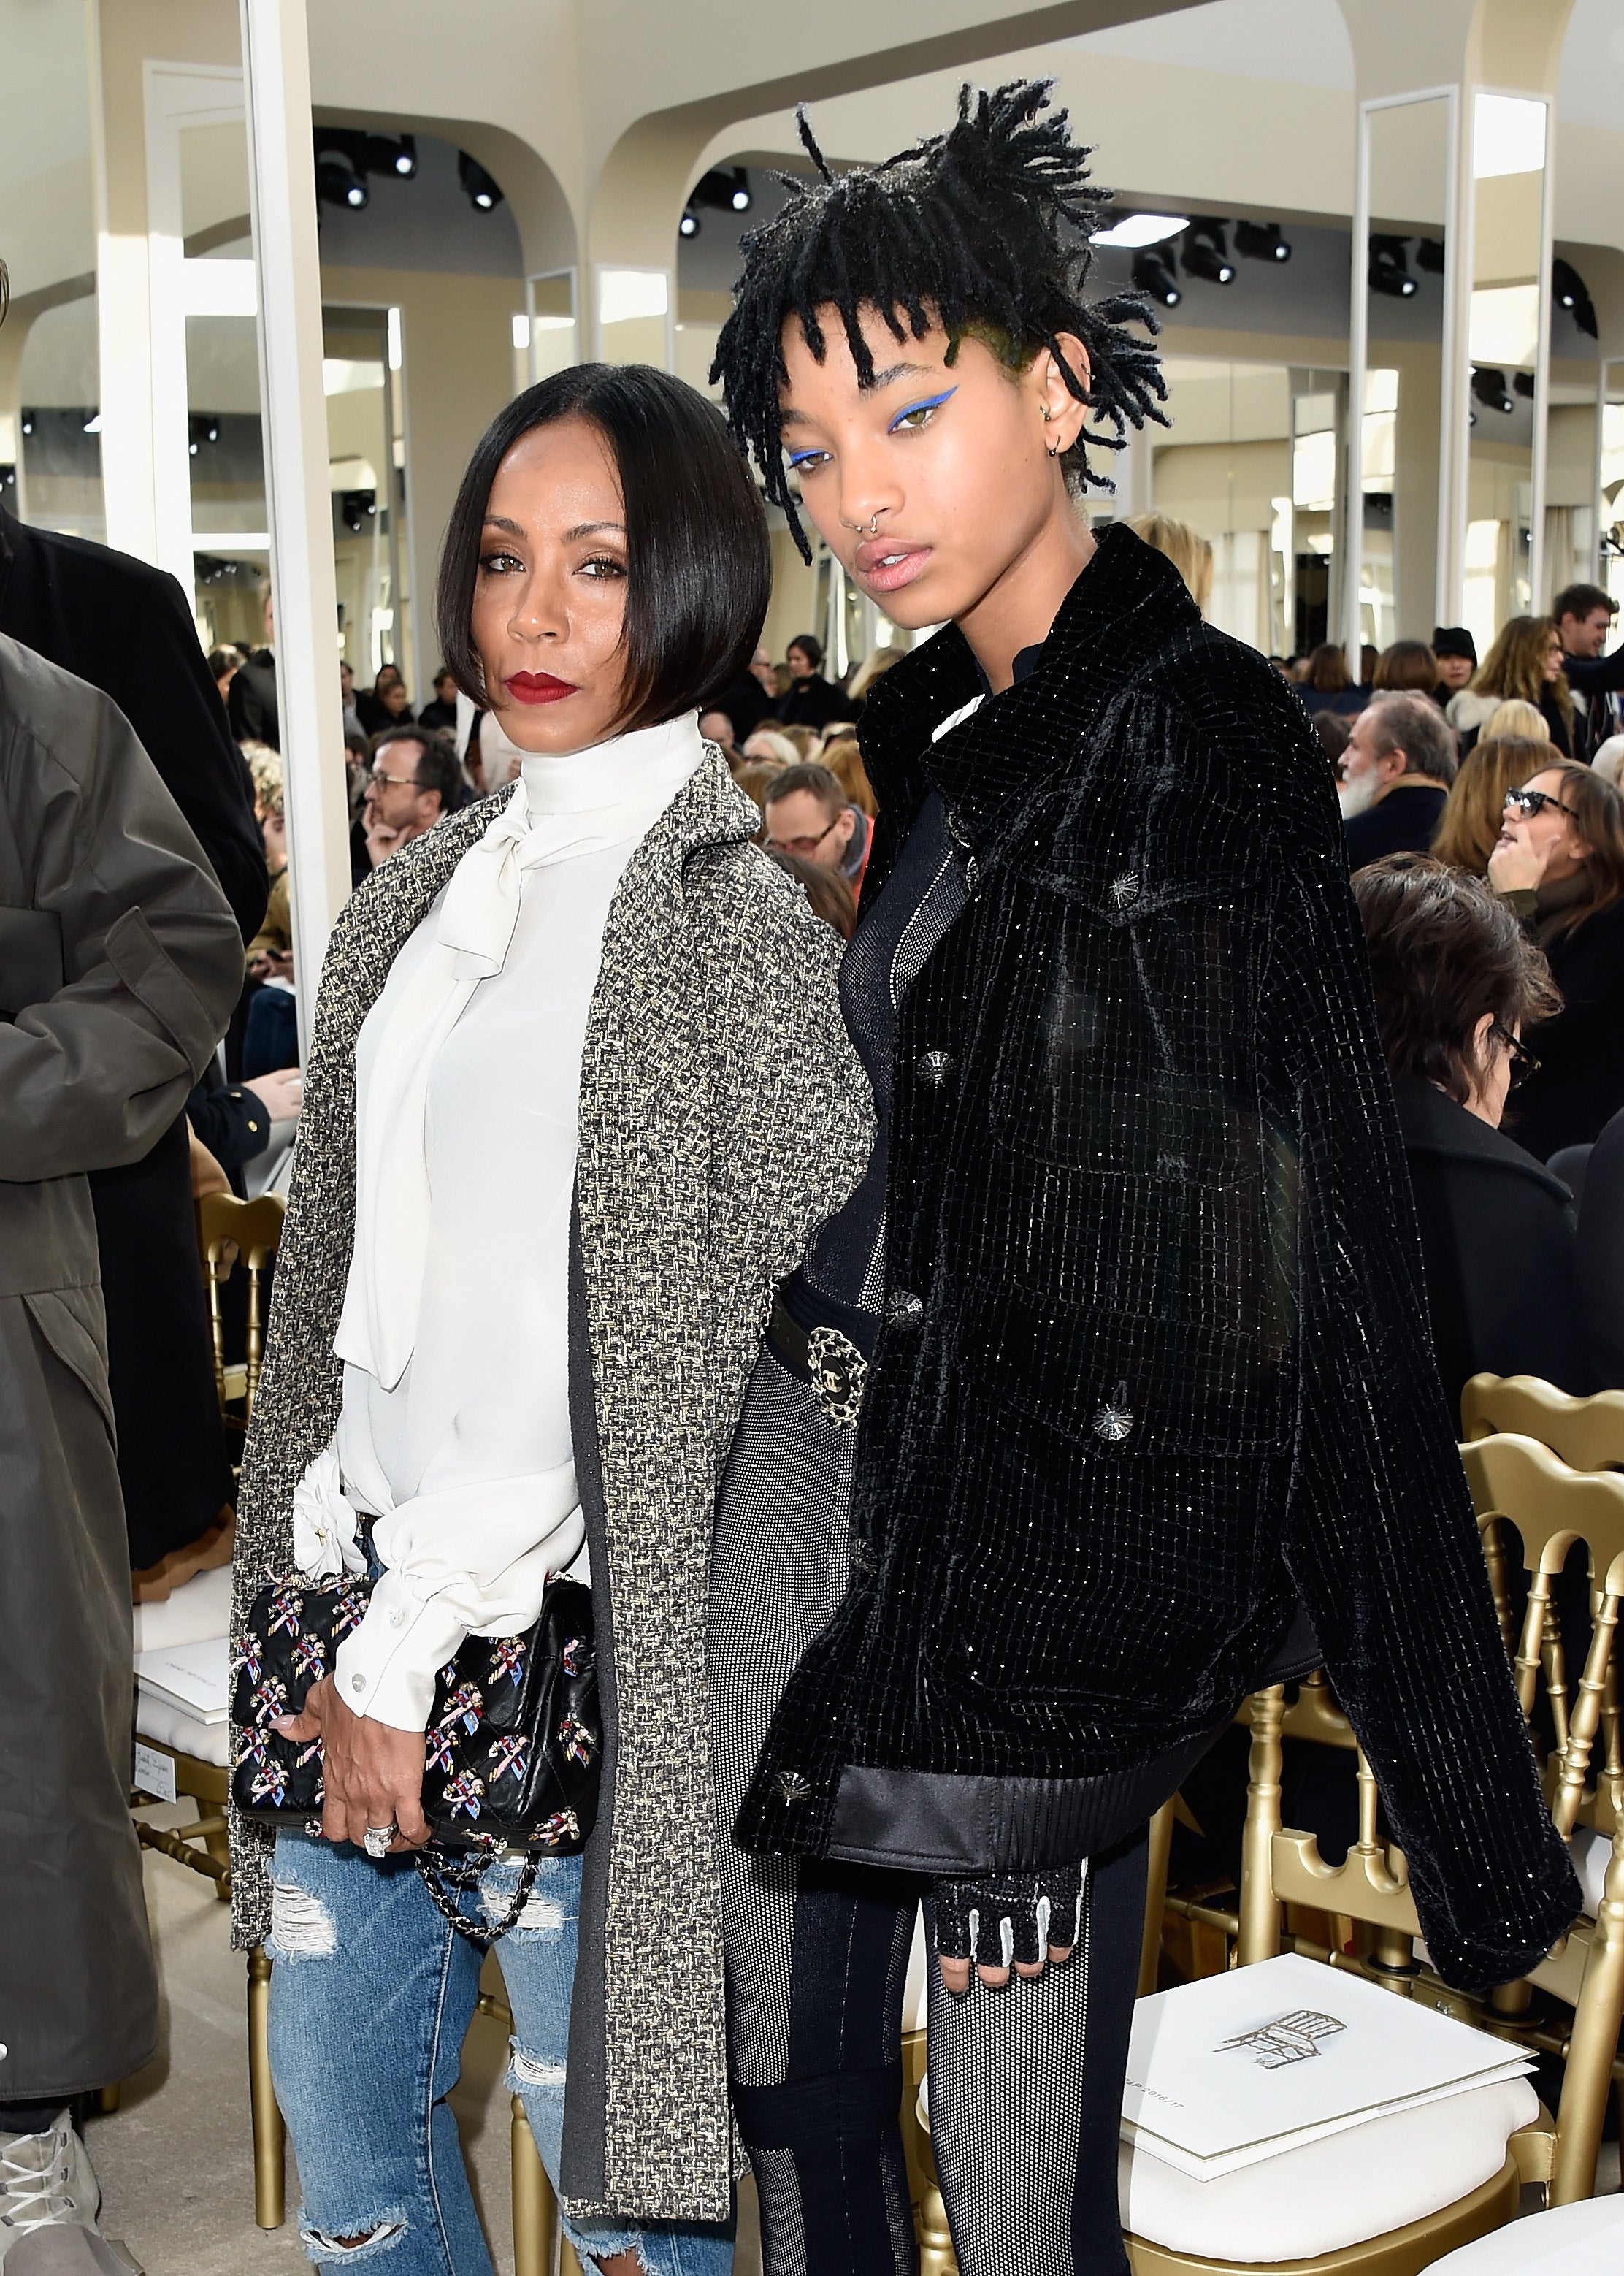 Willow and Jada Pinkett Smith, Kelly Rowland, and More!
